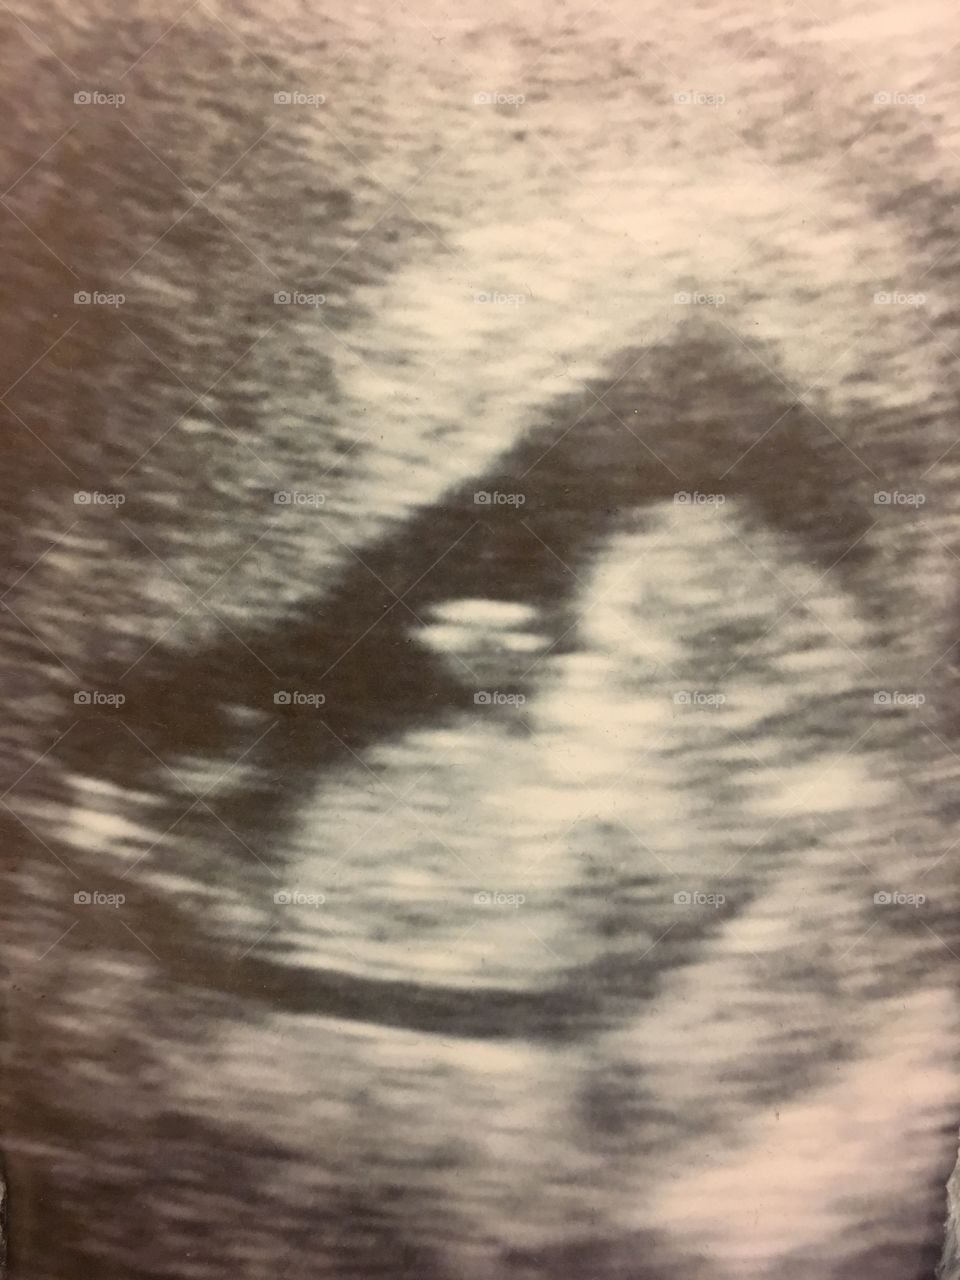 Saying hi from inside the womb.  Hi Enzo 